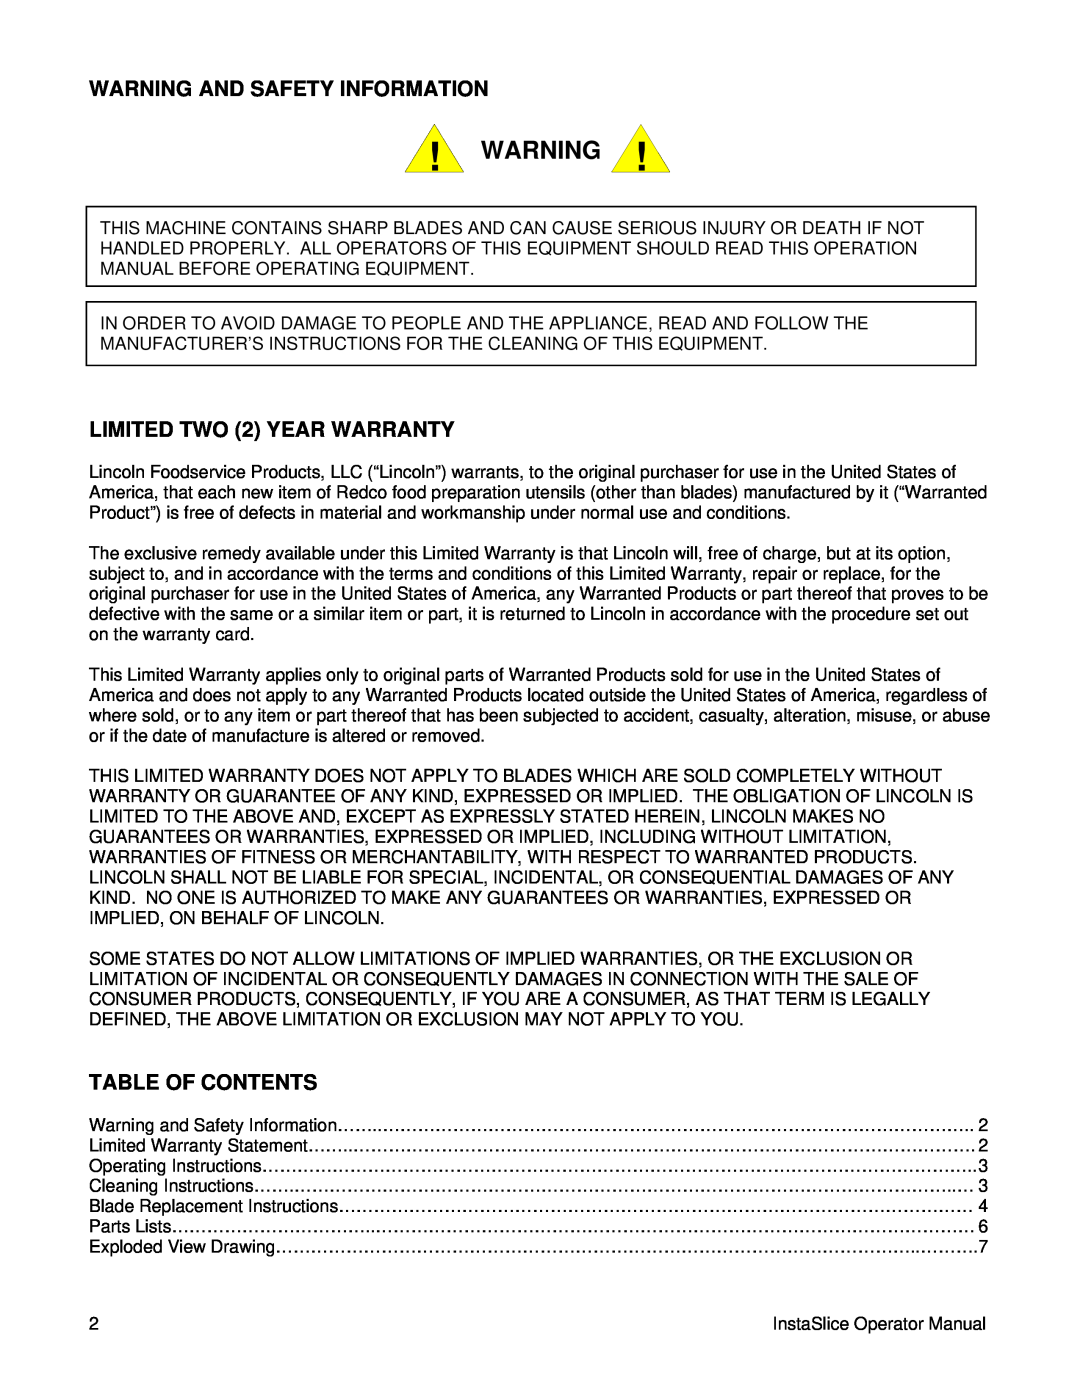 Lincoln 2806405 warranty Warning And Safety Information, LIMITED TWO 2 YEAR WARRANTY, Table Of Contents 